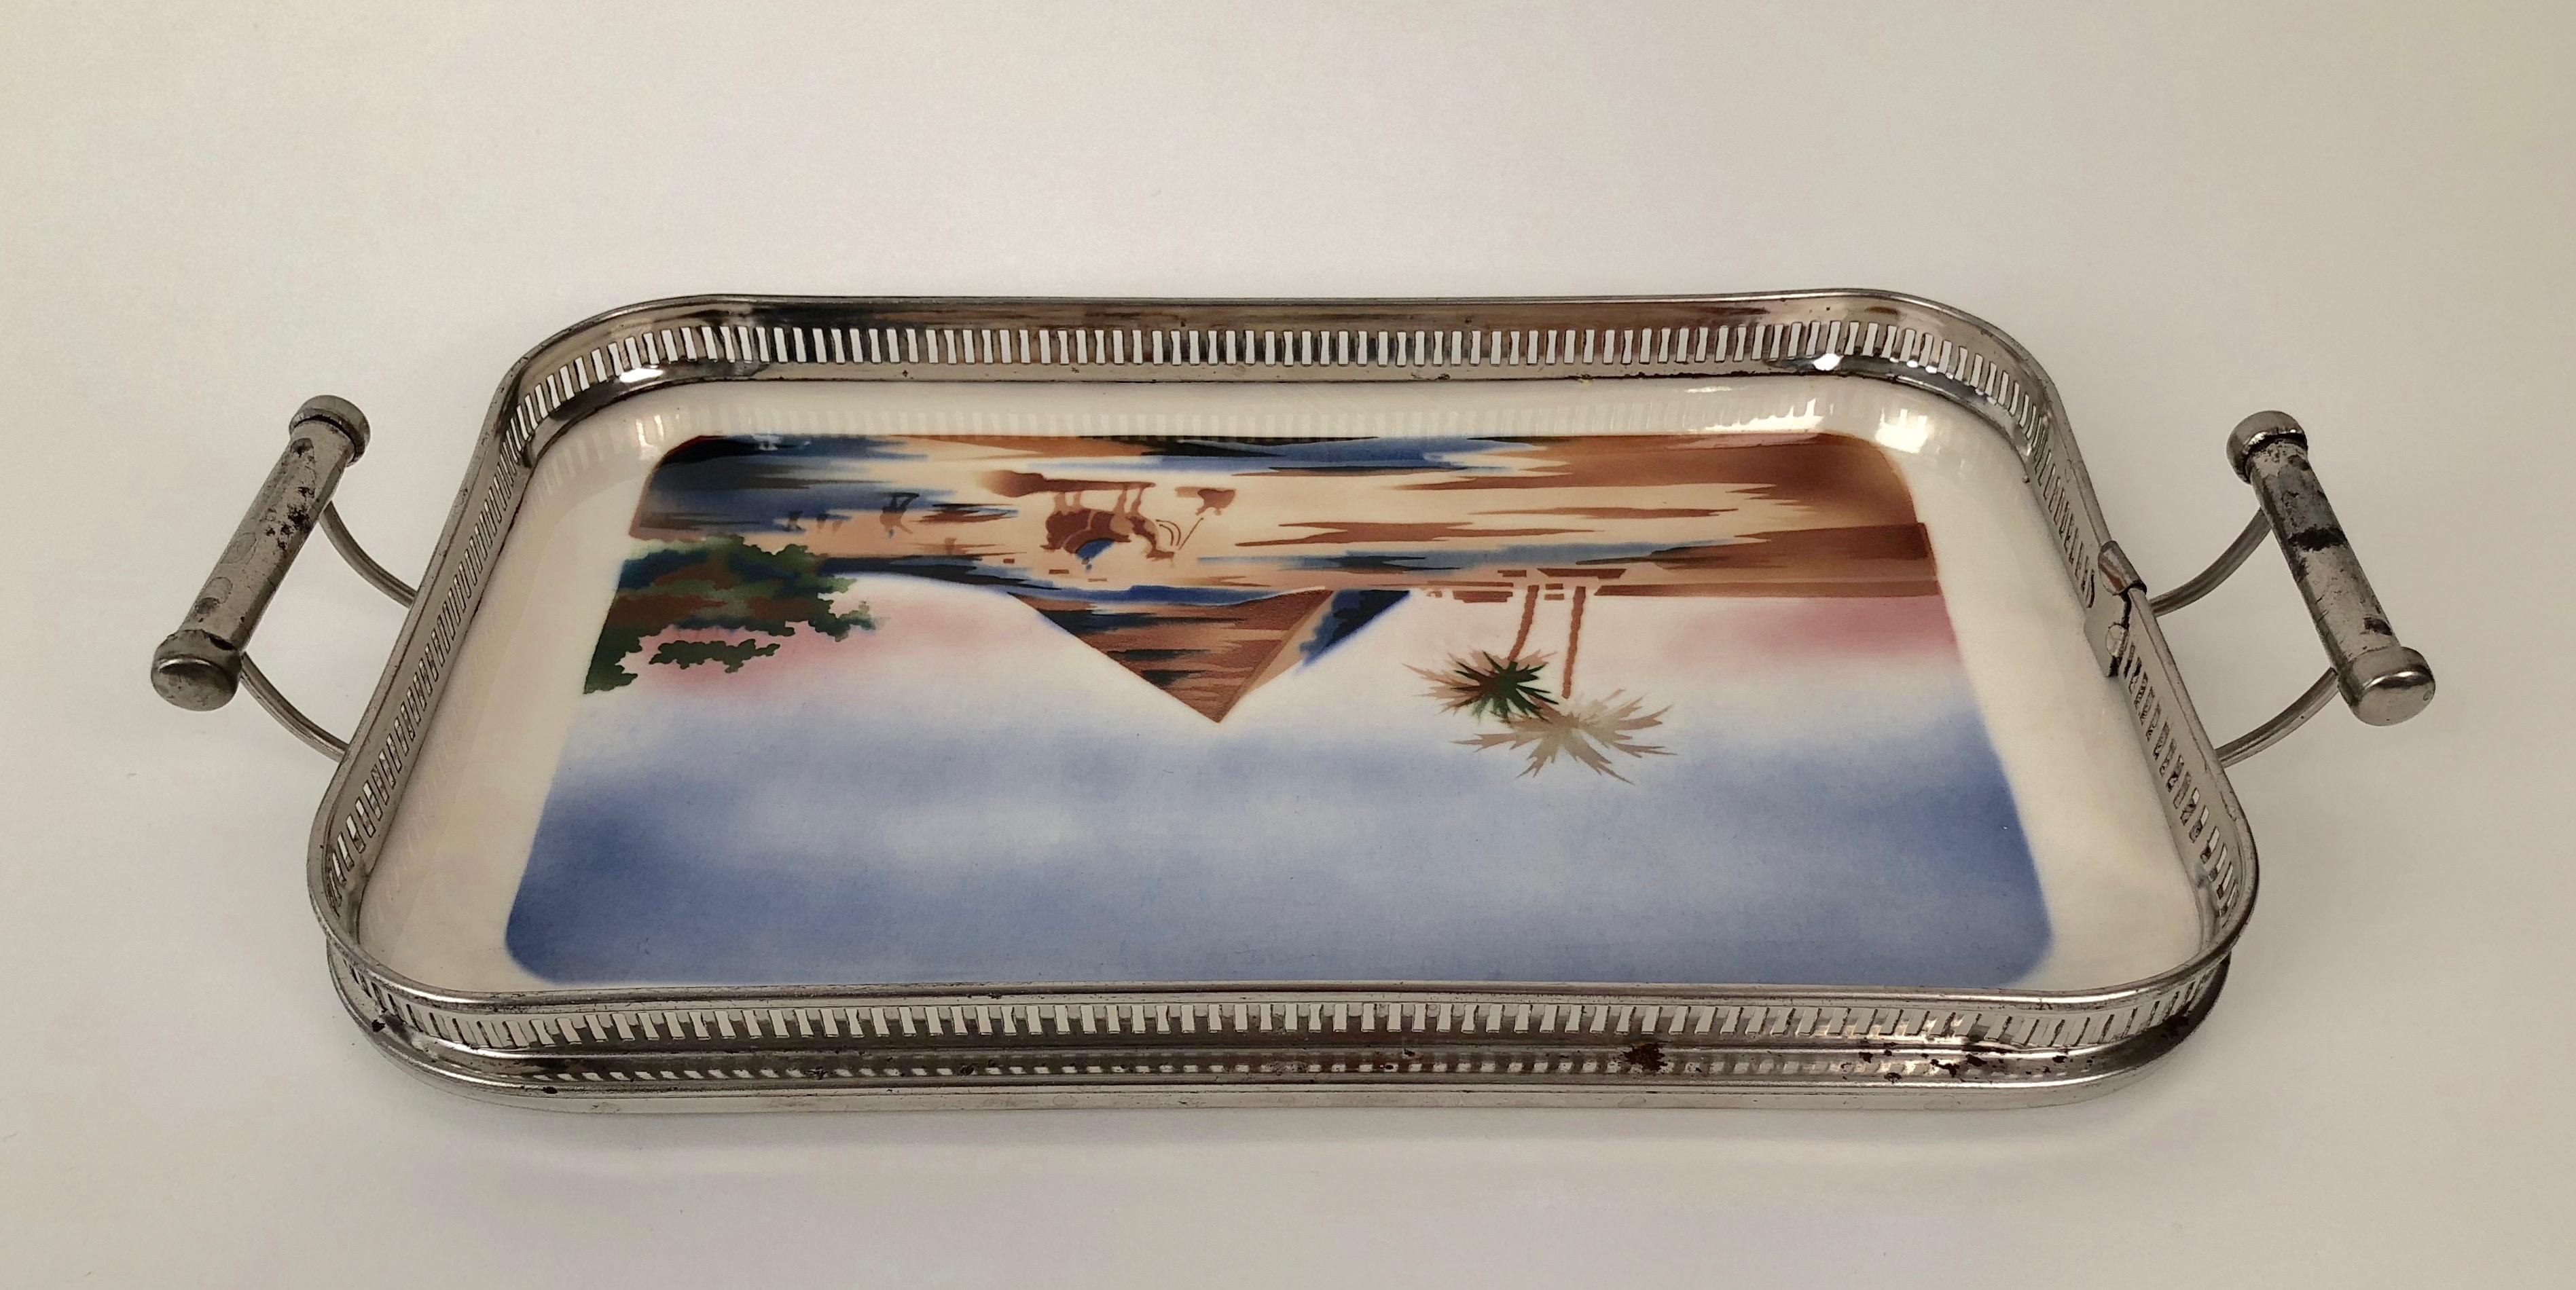 Czech Ceramic Tray with Metal Montage and Egyptian Motiv from the 1920s For Sale